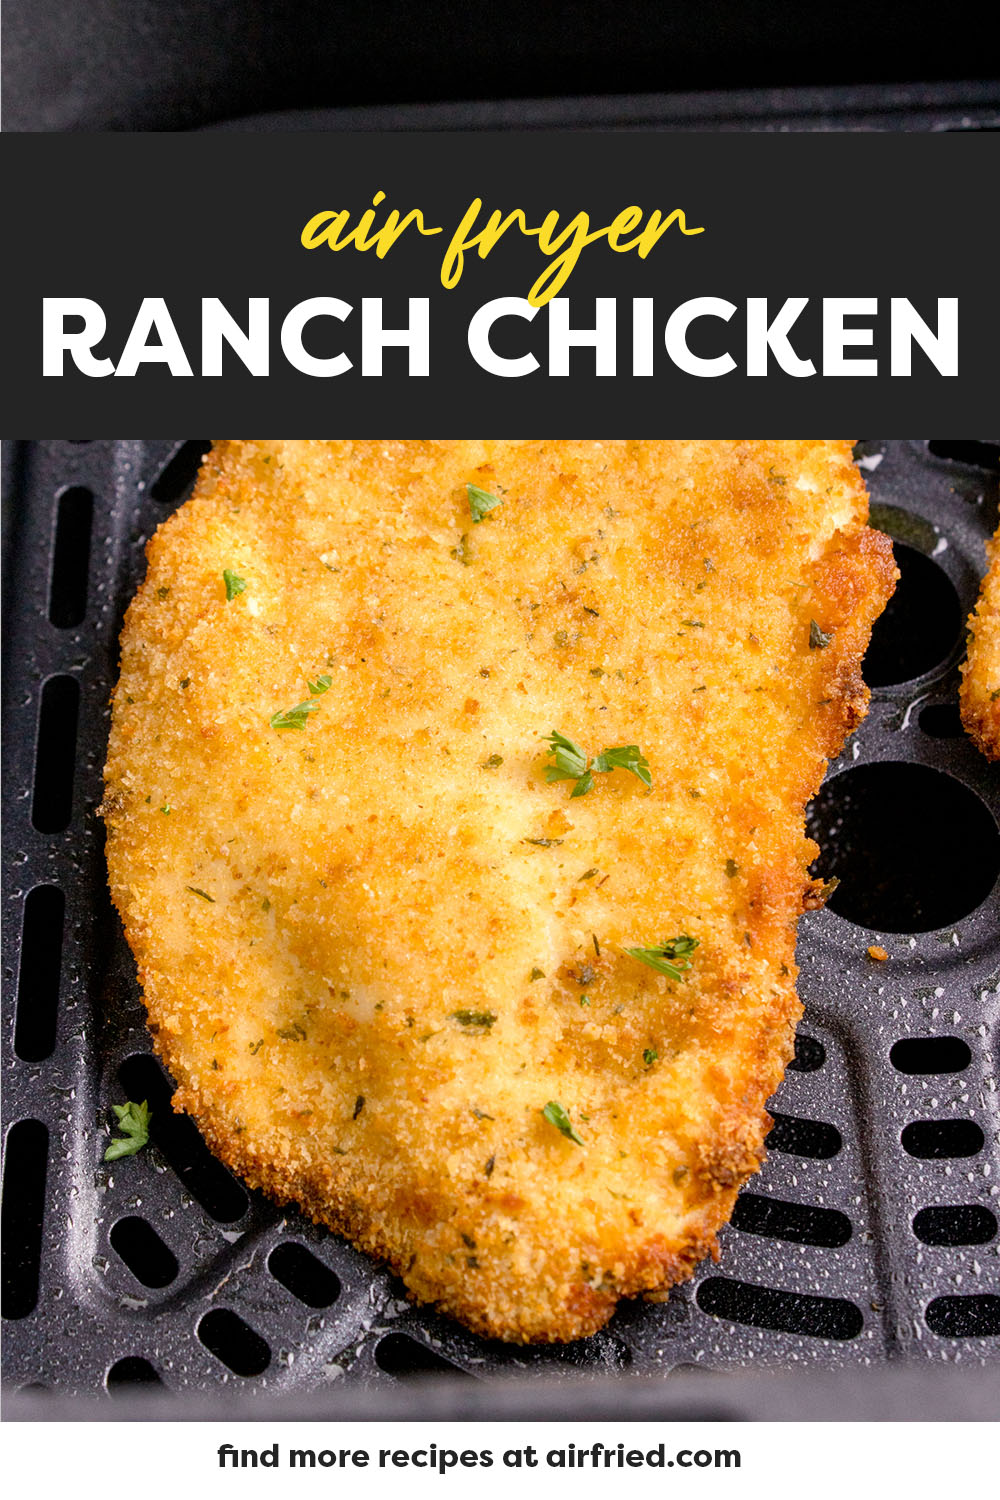 Our Air Fryer Ranch Chicken is a quick & easy crispy breaded chicken recipe made with breadcrumbs and ranch seasoning! It's ready in just 30 minutes and perfect for weeknight dinners!